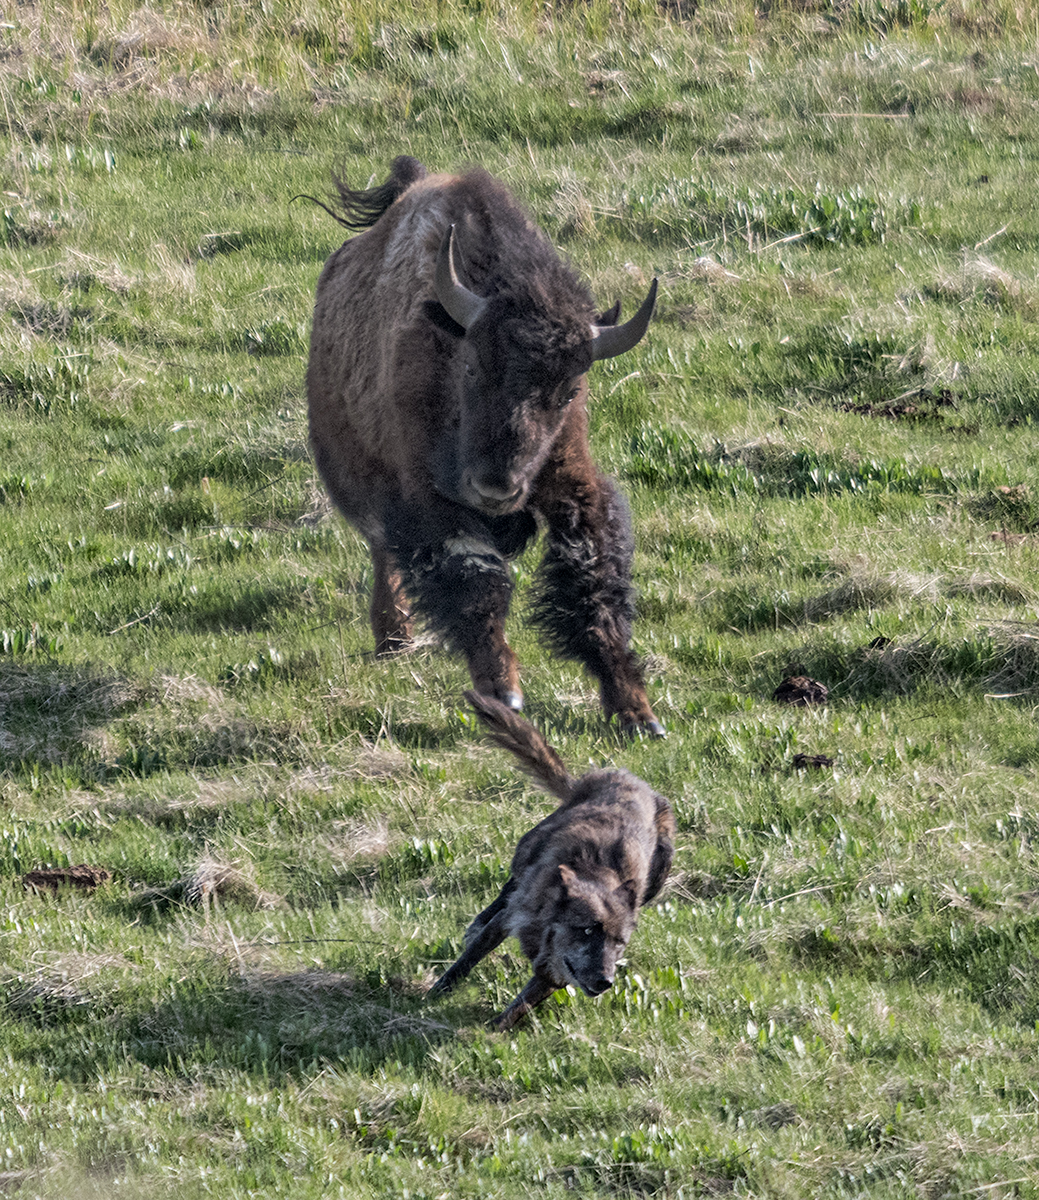 Angry American Bison chasing Grey Wolf in the Lamar Valley Yellowstone National Park